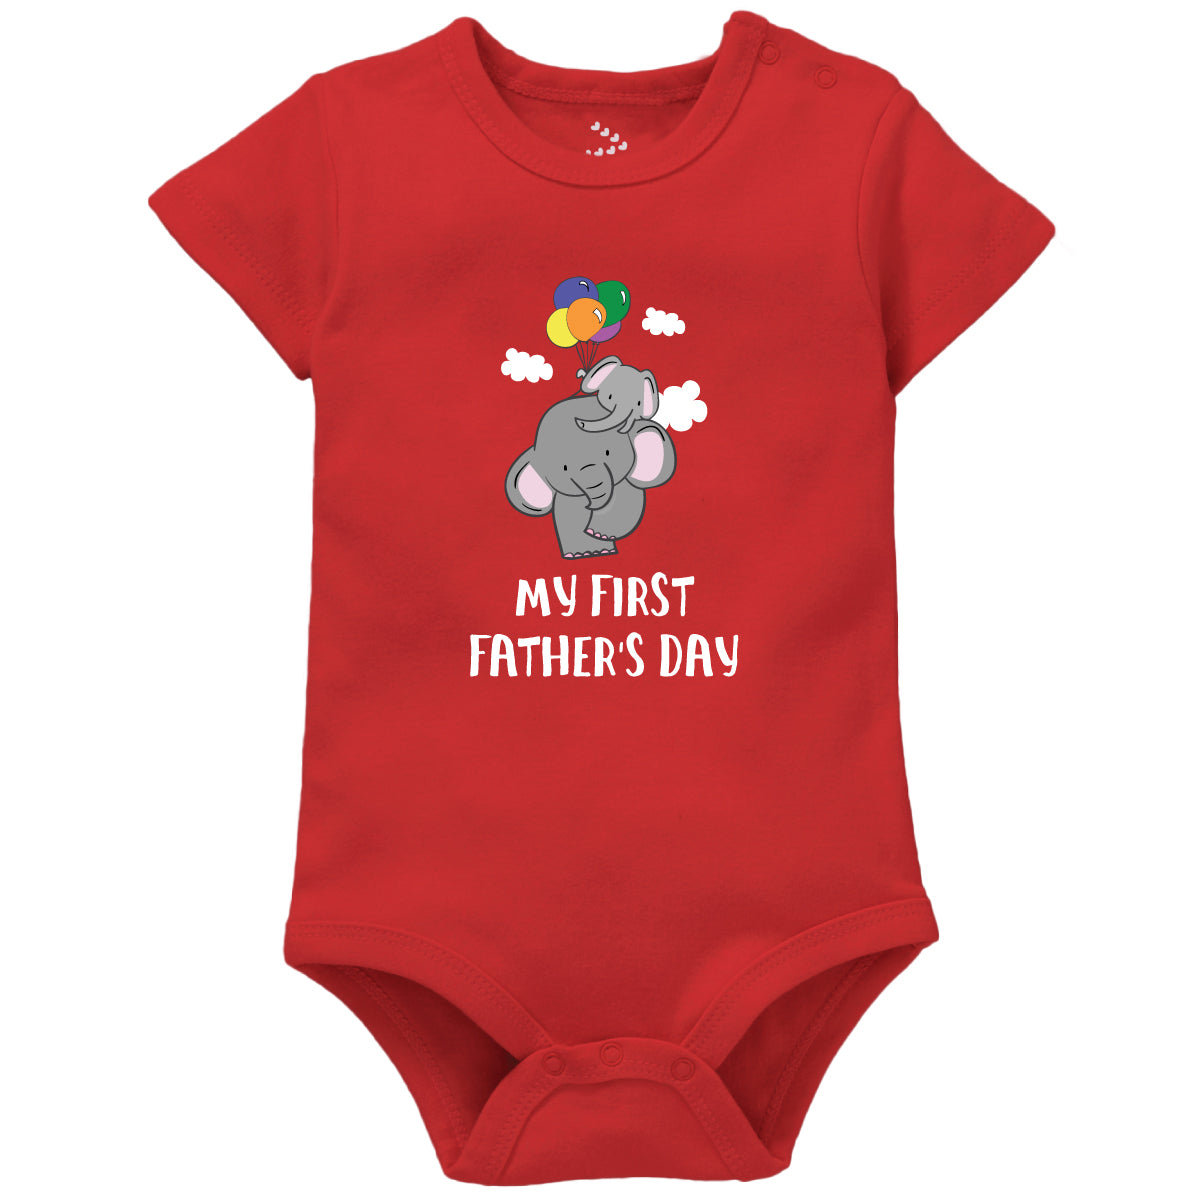 My First Father's Day - Red